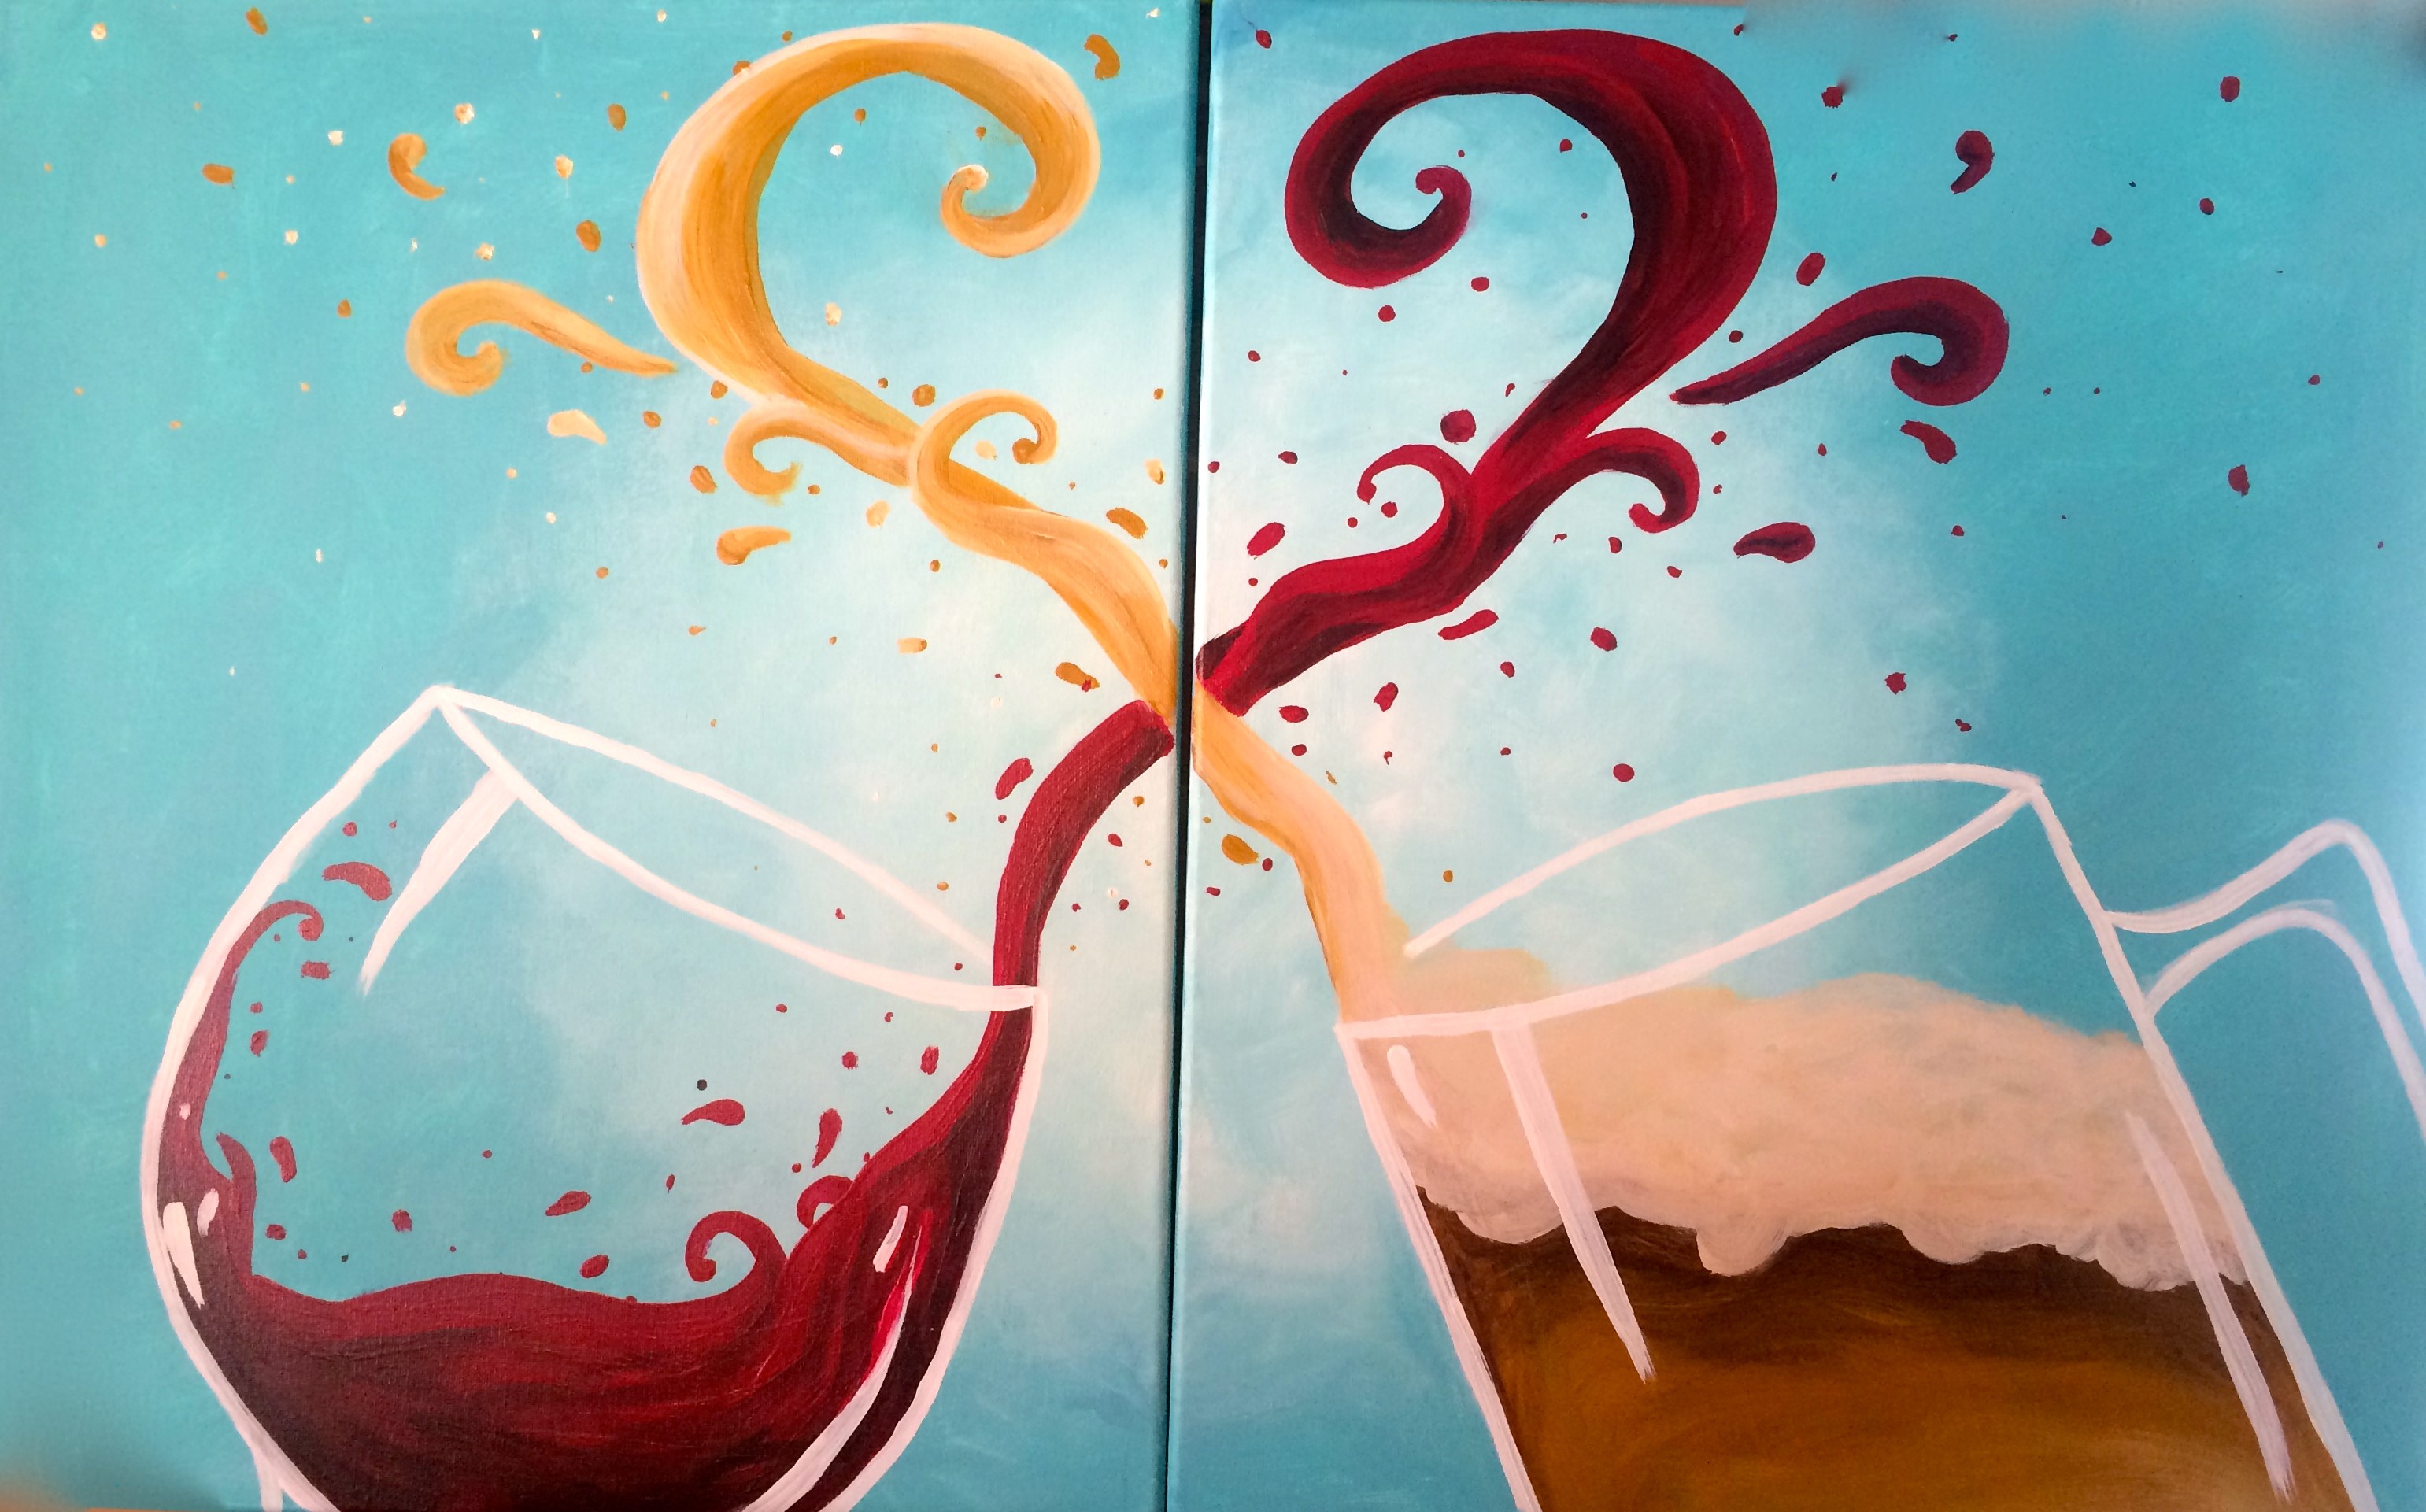 Paint and Sip Date Night Activity